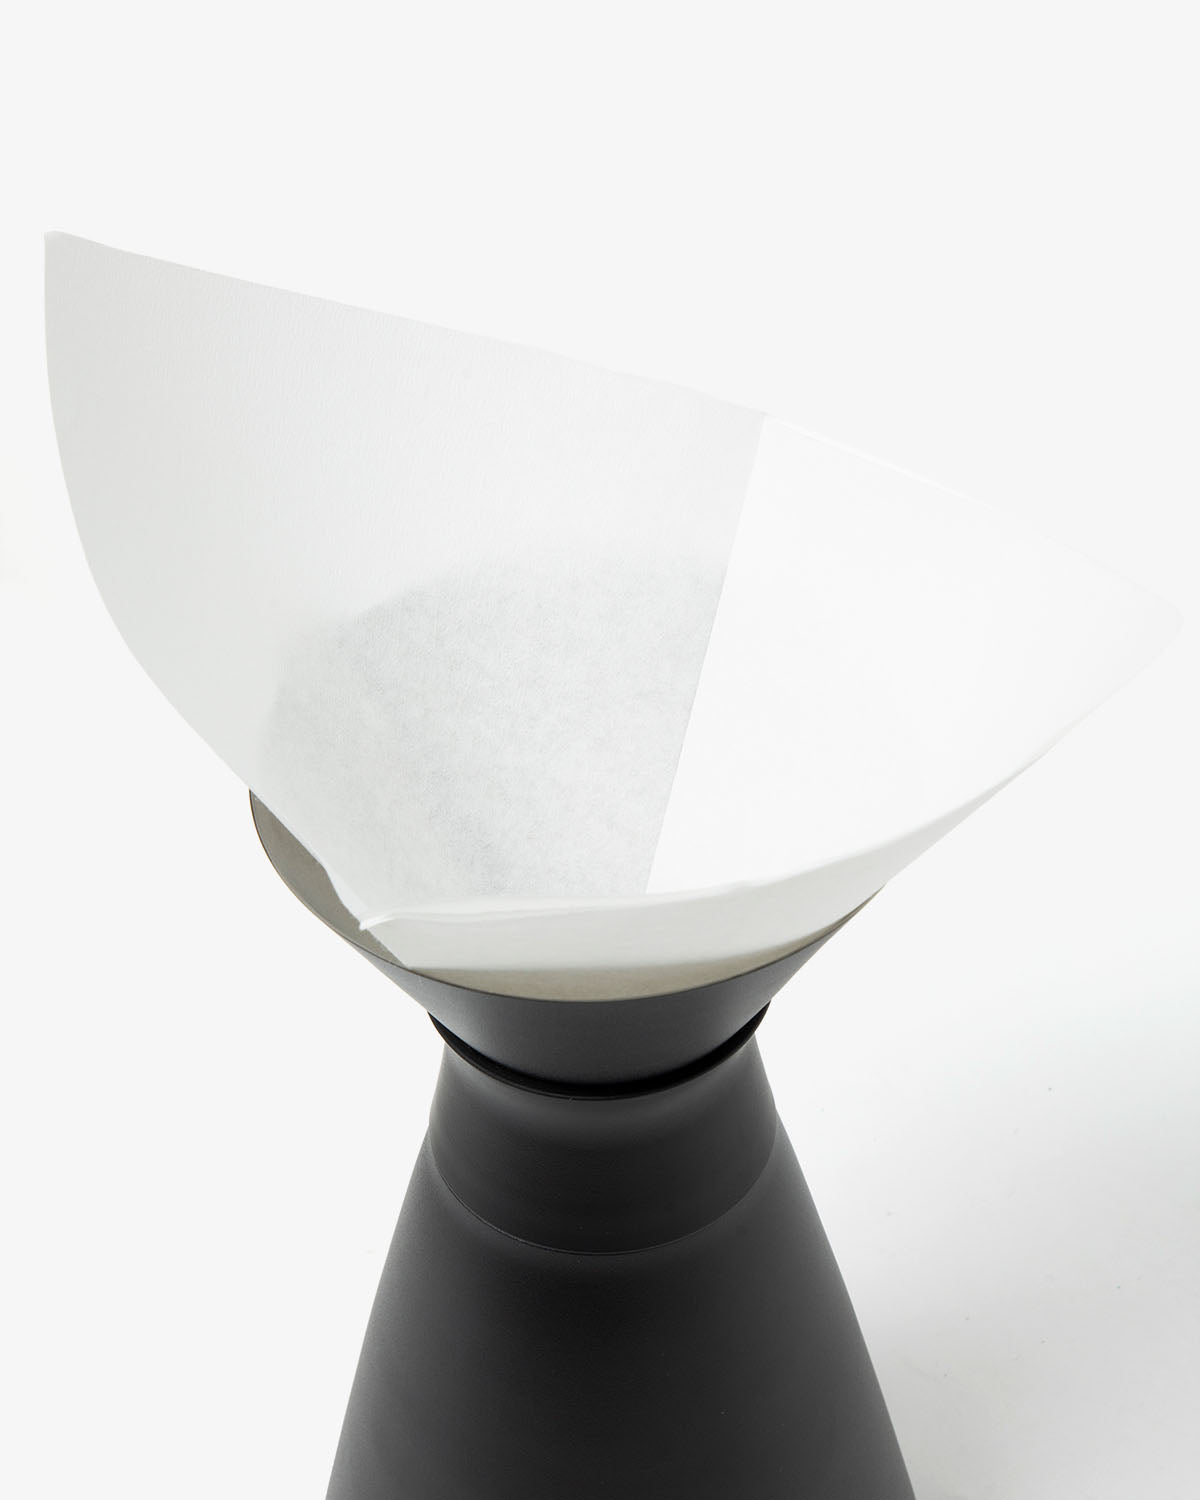 NEW STANDARD CARAFE COFFEE FILTERS